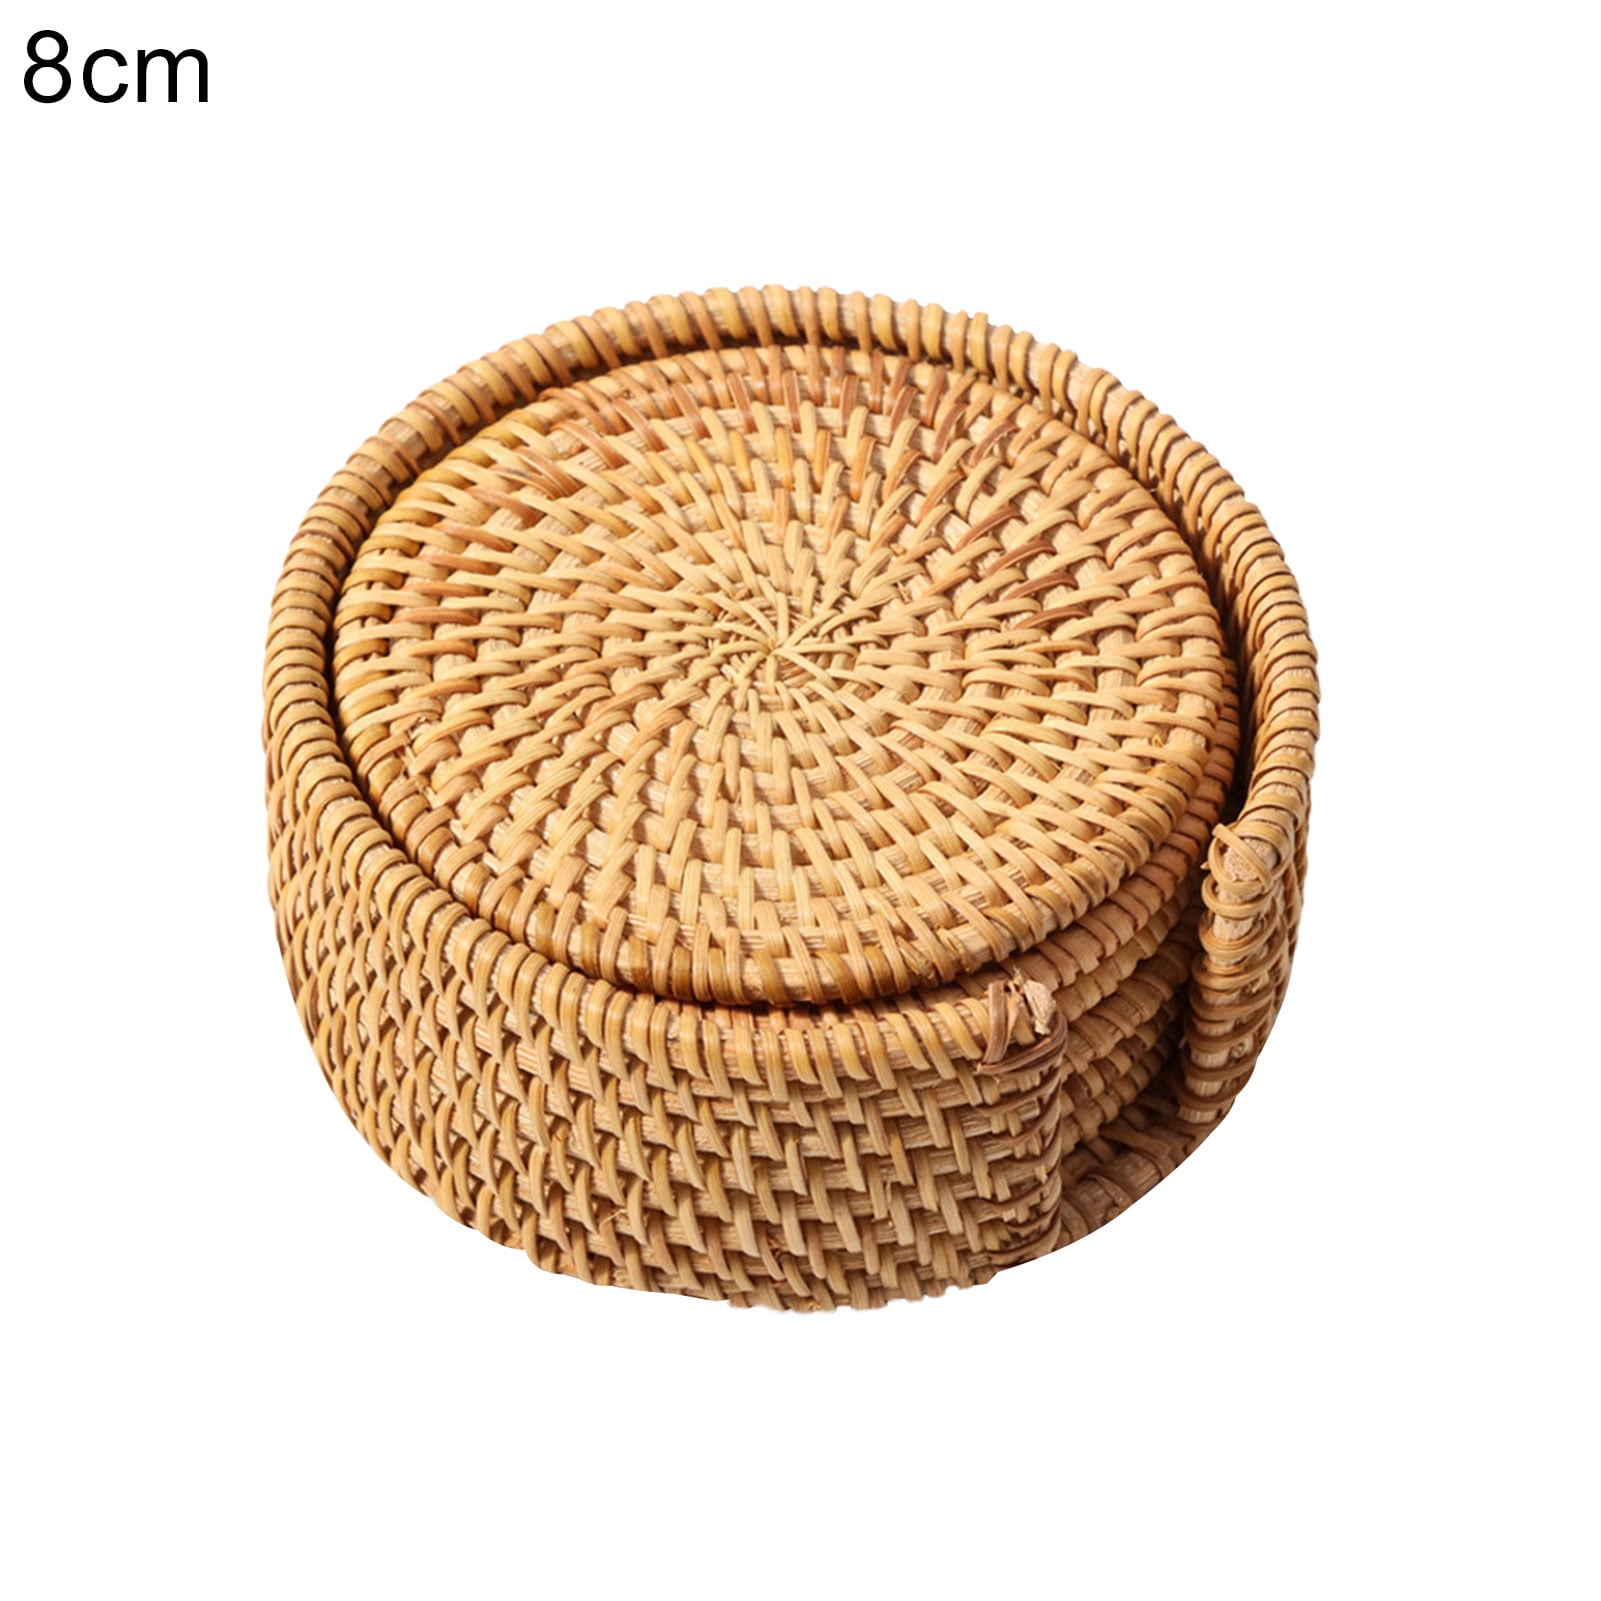 6Pcs/Set Vintage Rattan Coasters With Basket Handmade Woven Drink Mats Placemats 